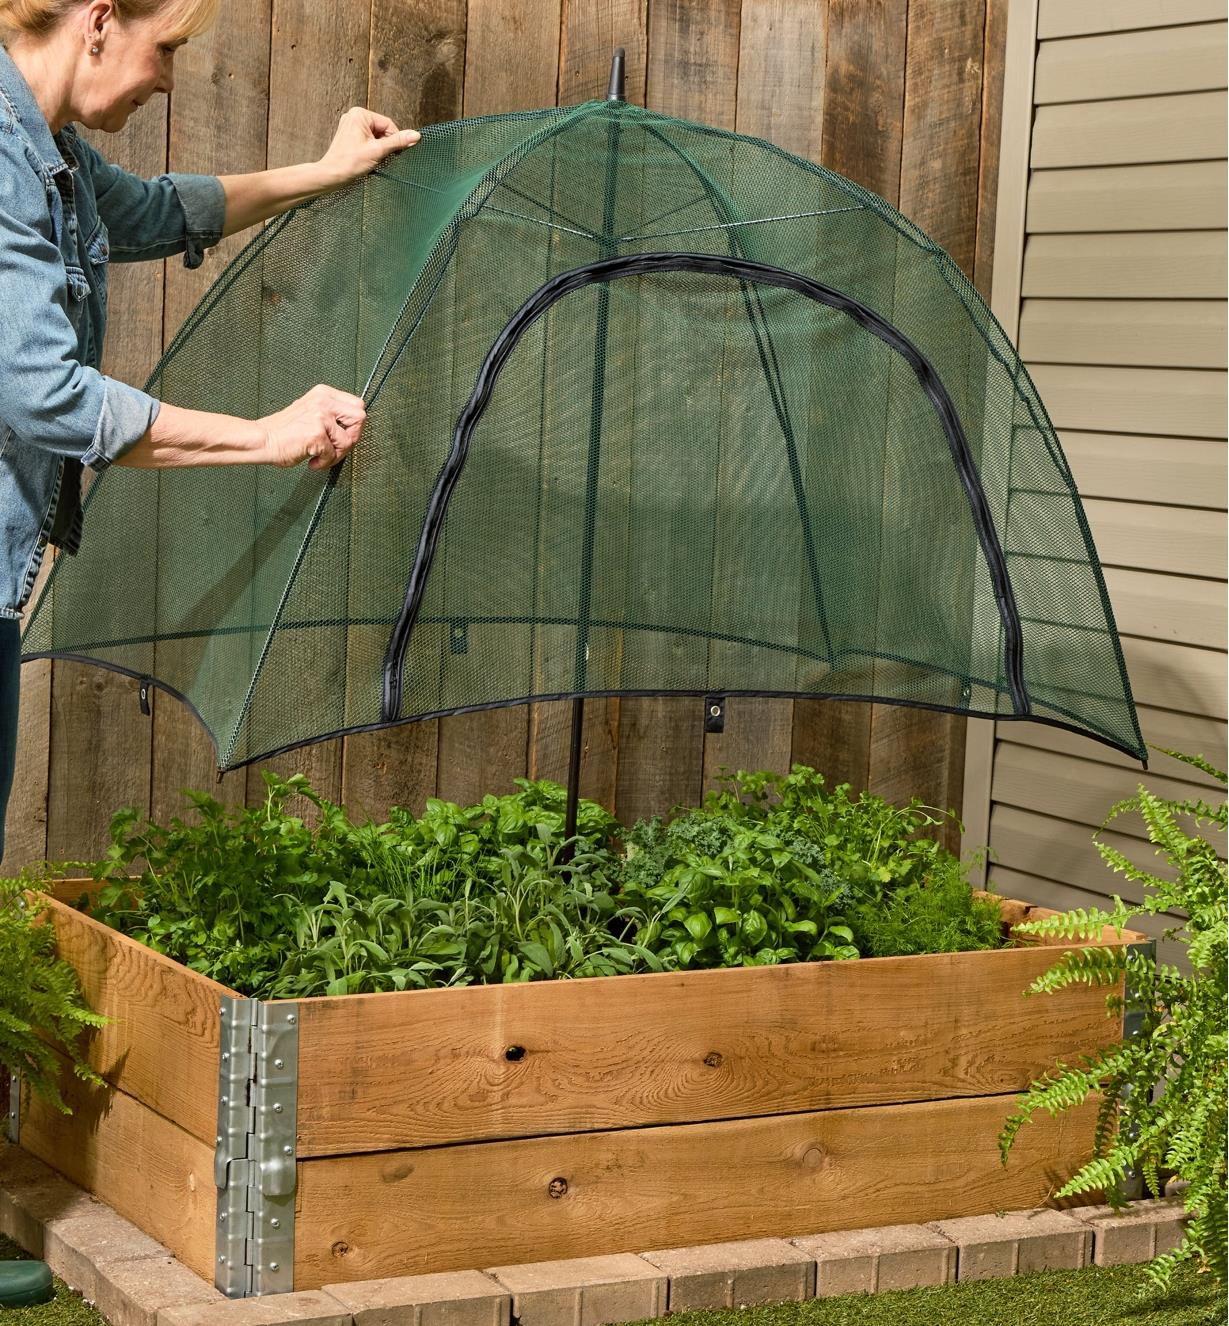 A gardener places the umbrella plant dome over some herbs and greens growing in a raised bed